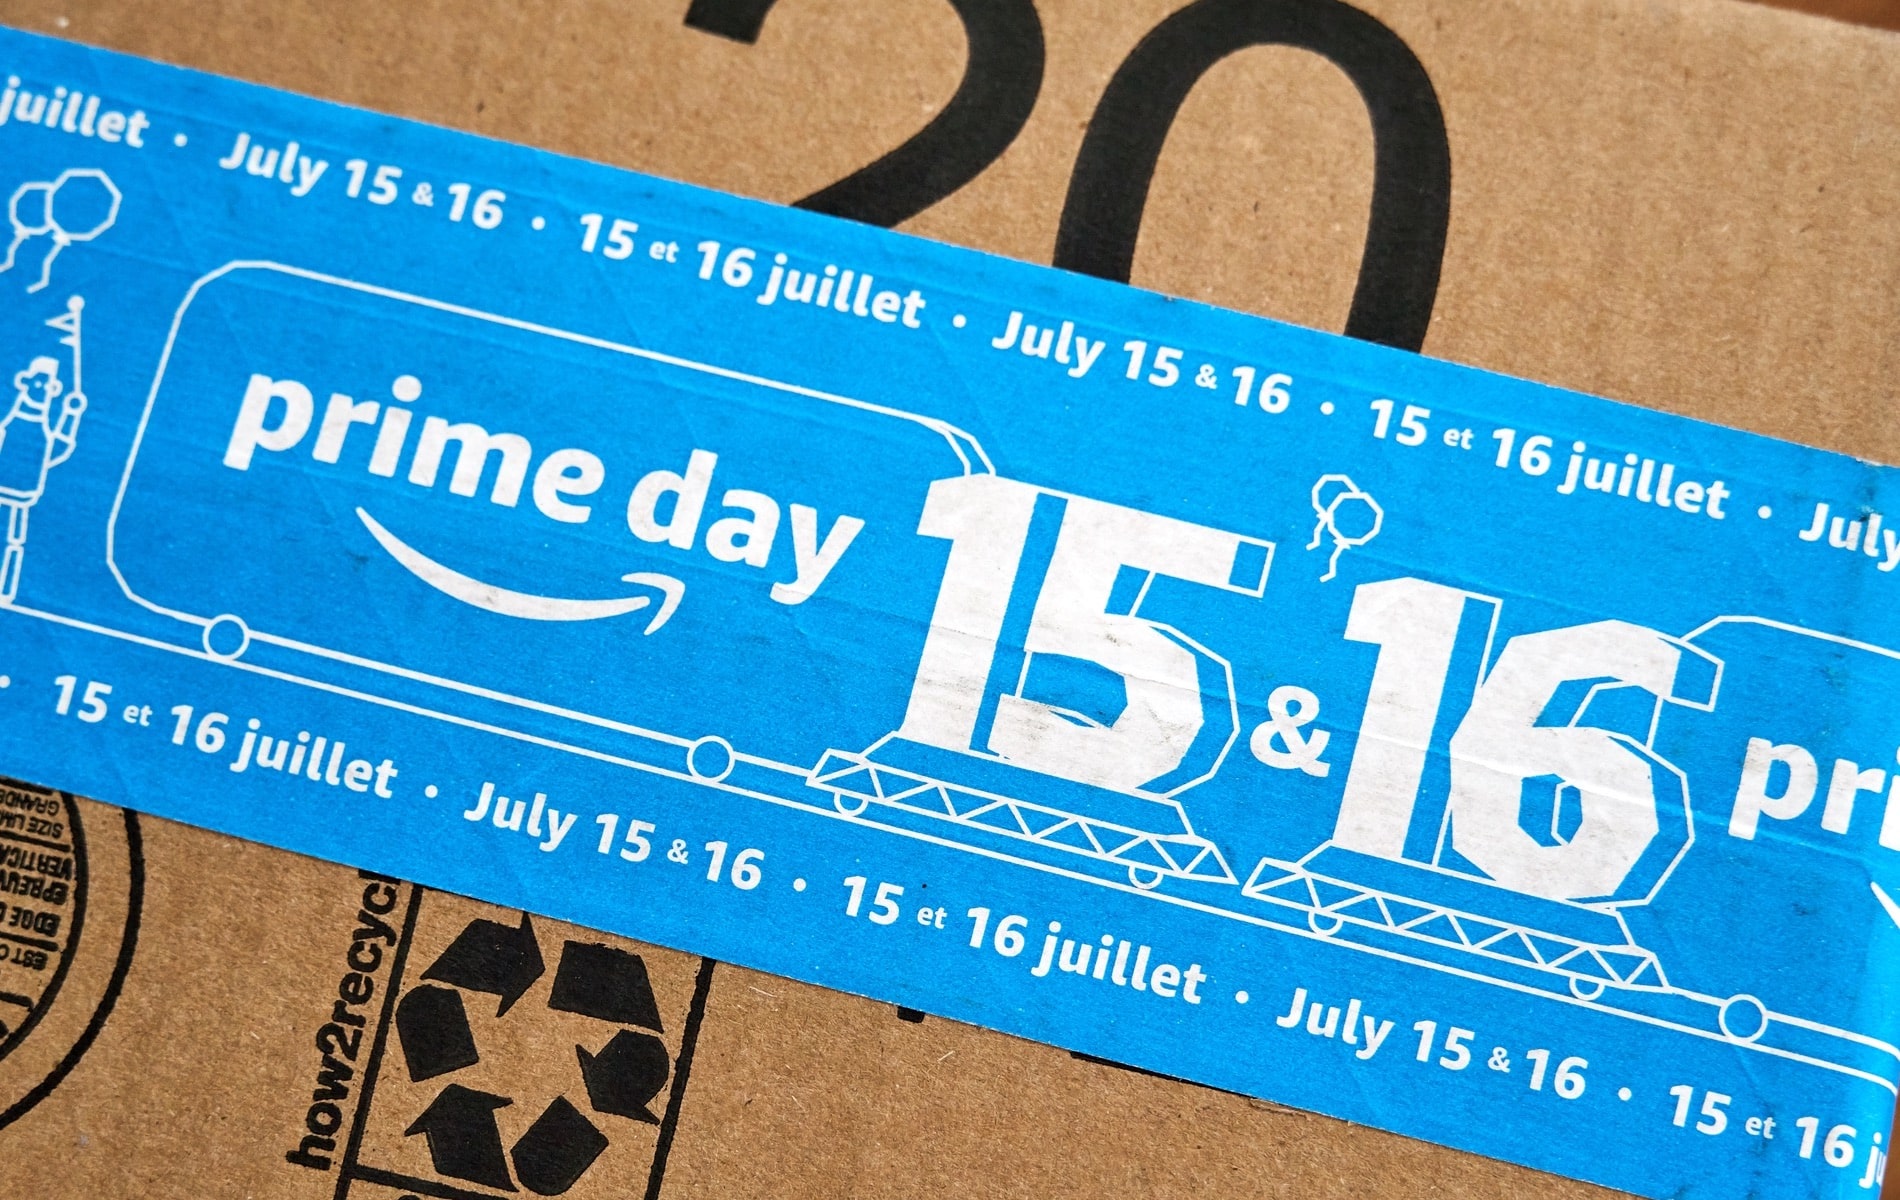 Don’t Miss Out on Amazon Prime Day Deals!